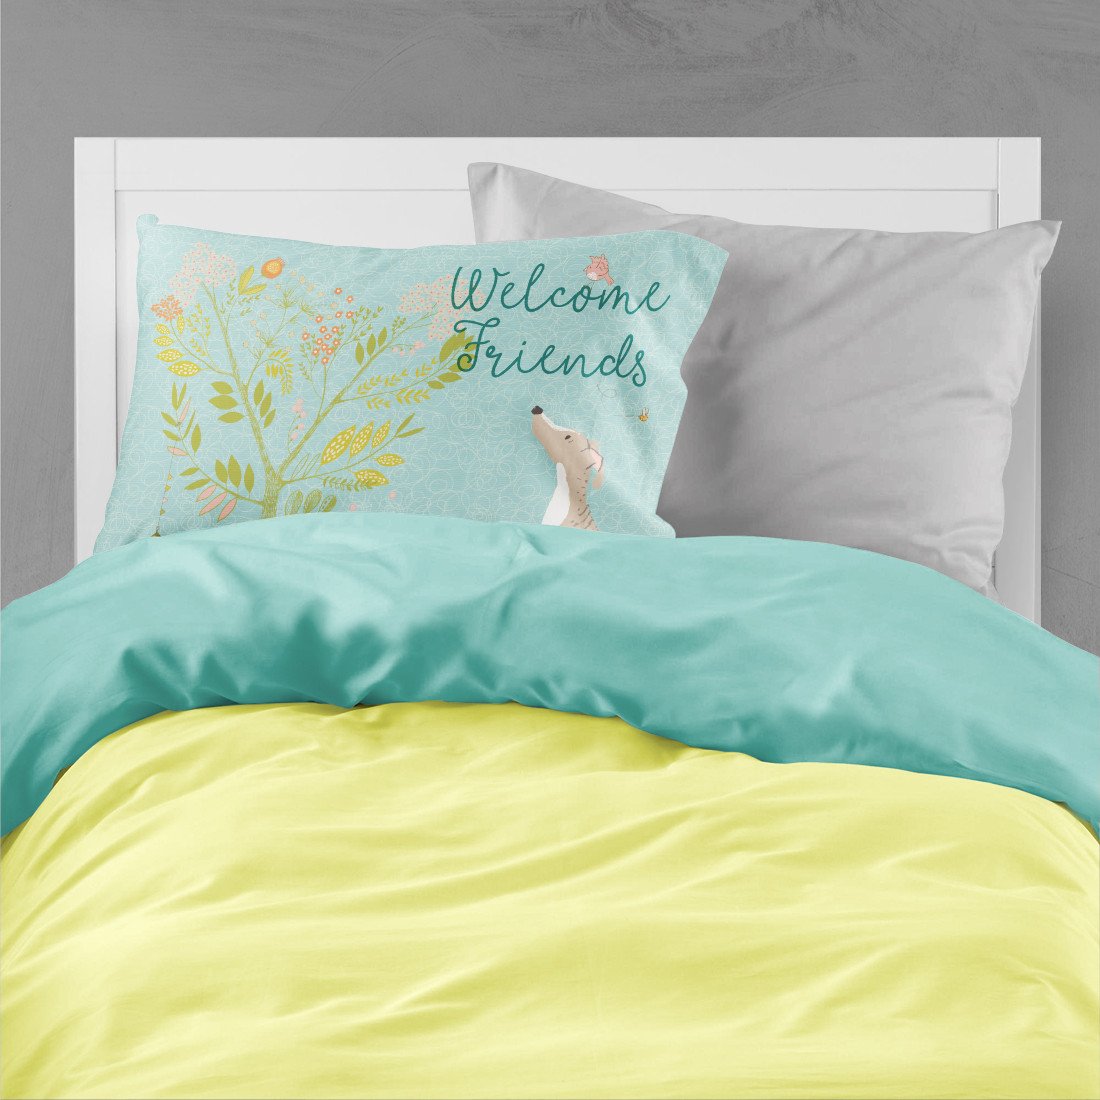 Welcome Friends Whippet Fabric Standard Pillowcase BB7626PILLOWCASE by Caroline's Treasures